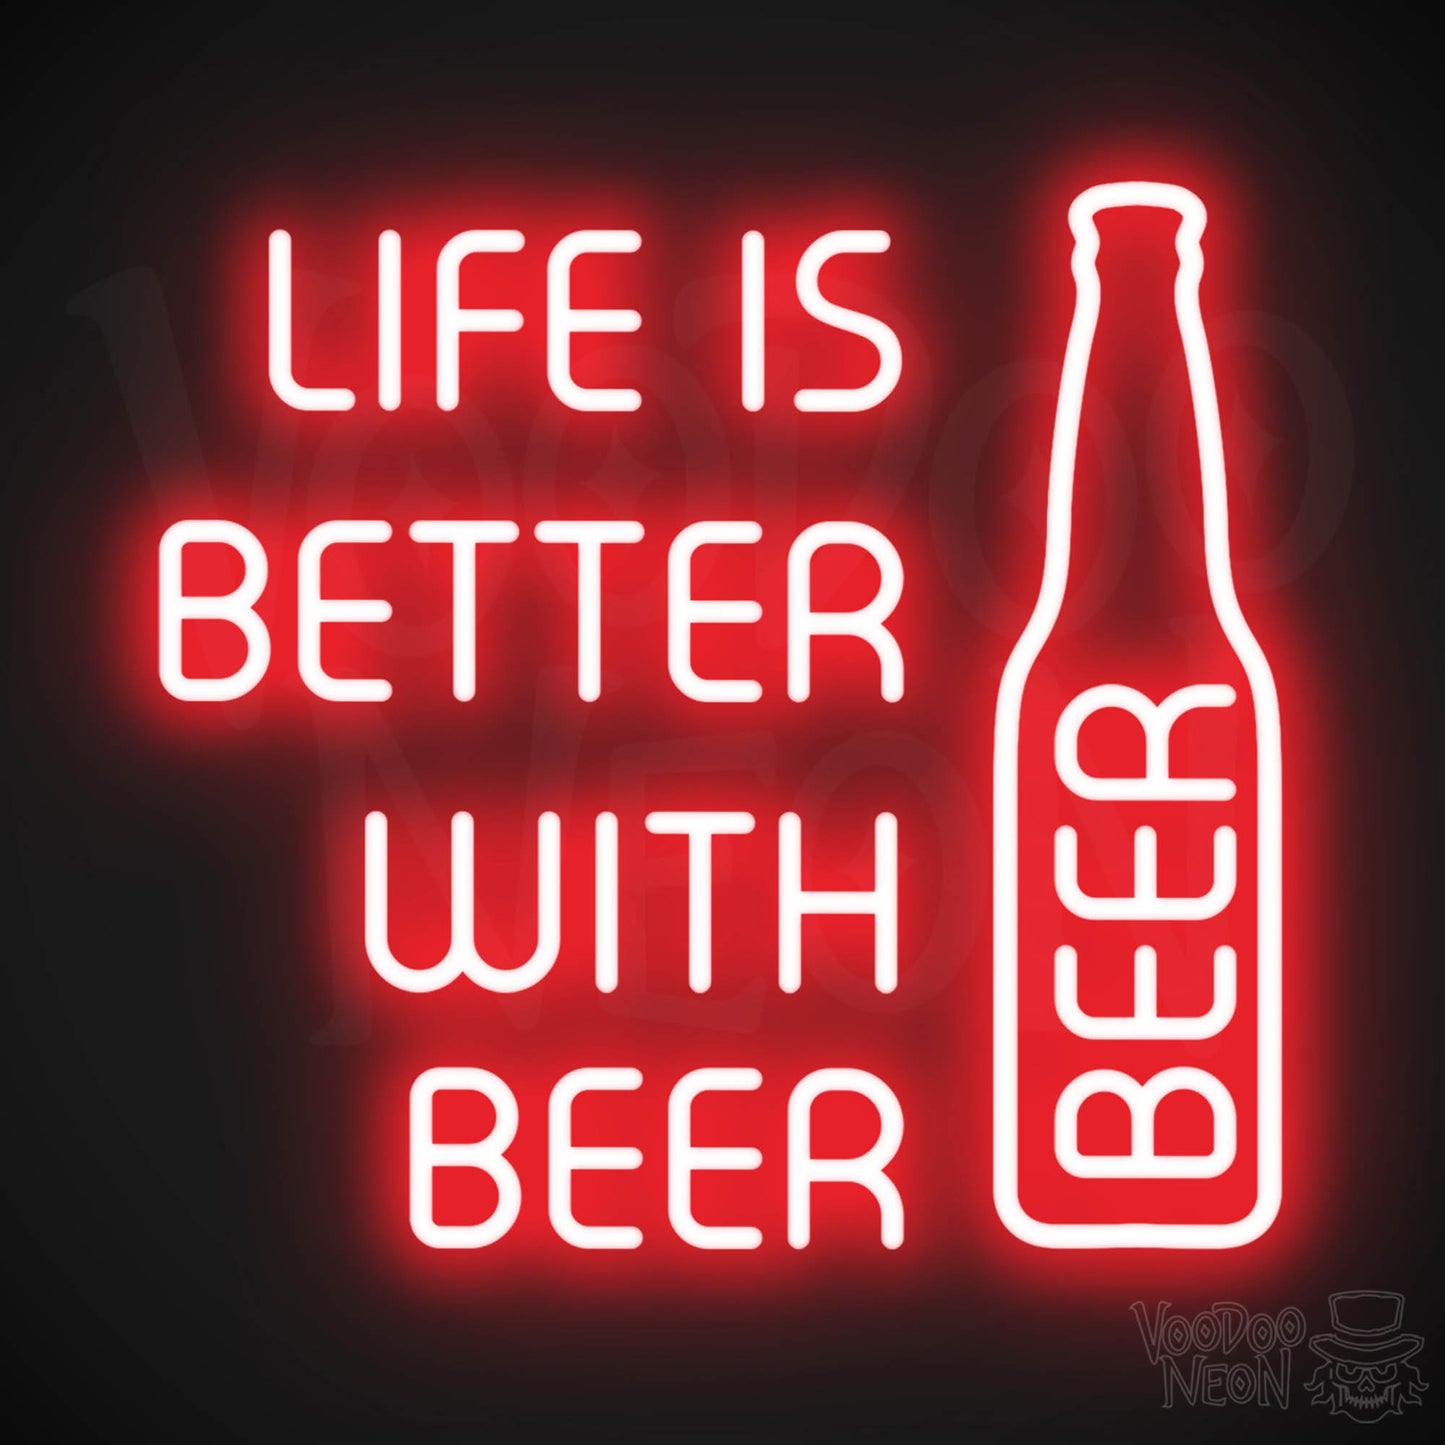 Life Is Better With Beer LED Neon - Red